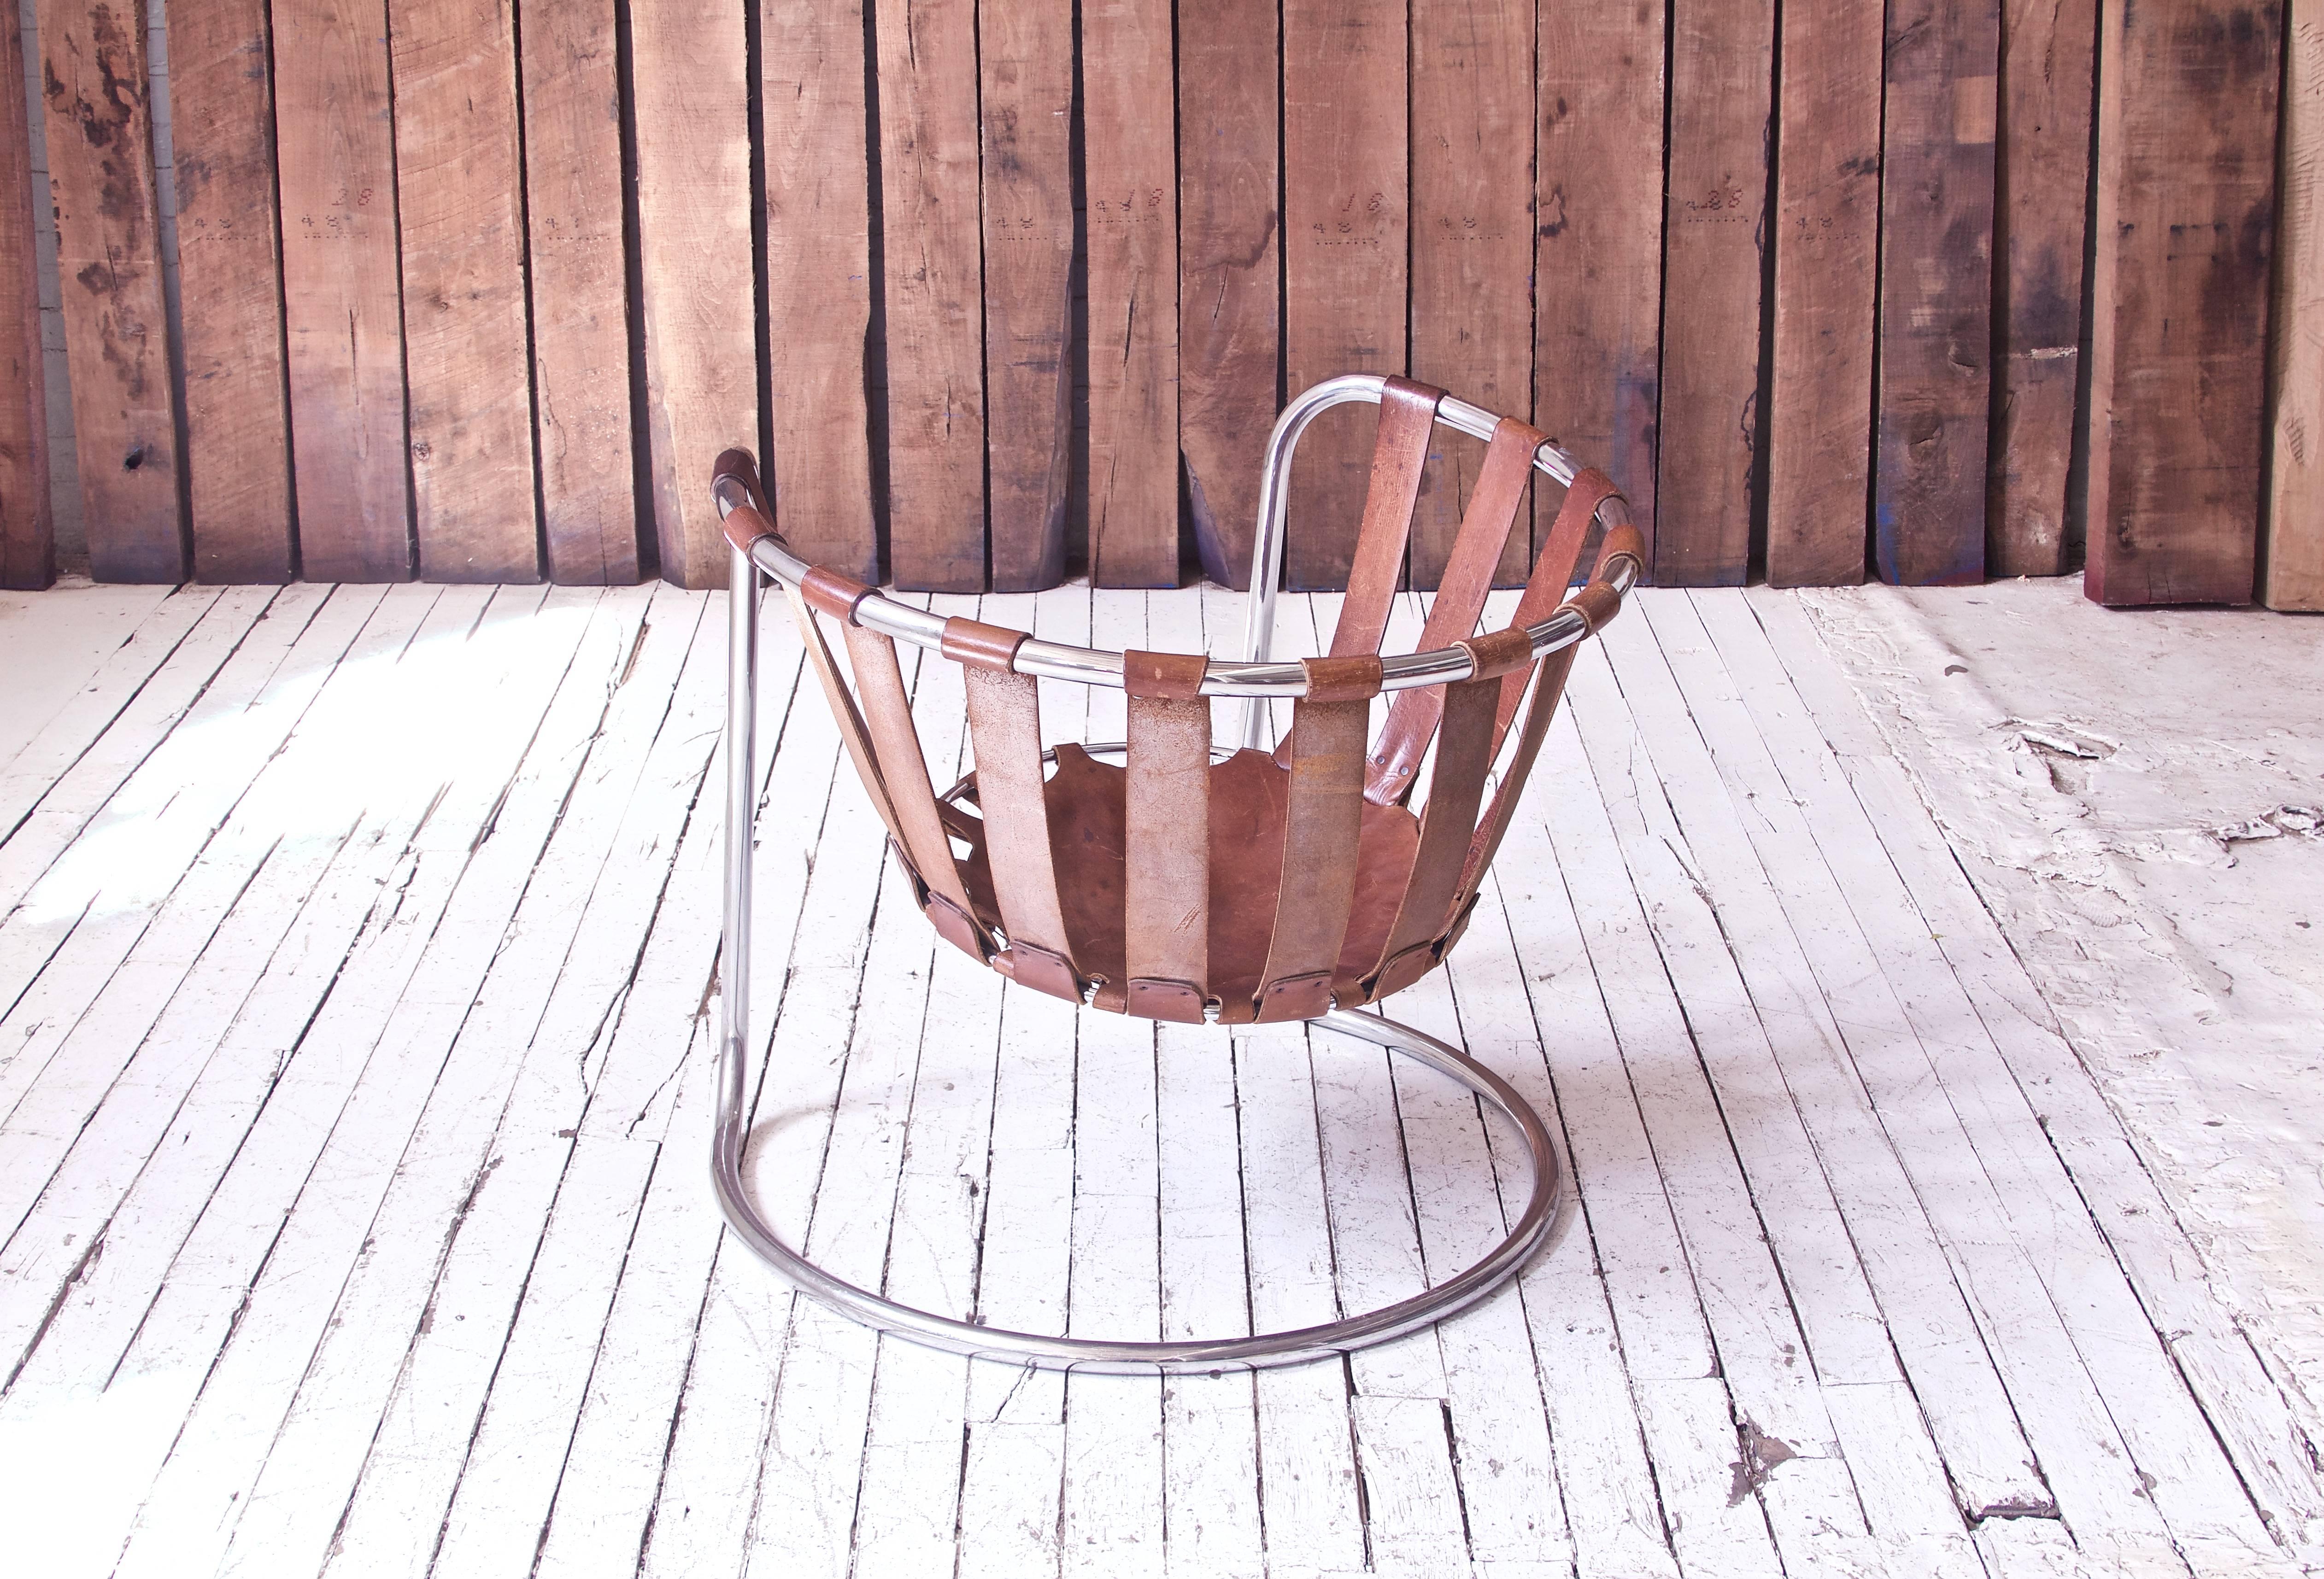 An interesting vintage French leather strapped sling chair, unique in design and surprisingly comfortable. The open, bent metal frame flexes and bounces to support the sitter in a weightless, completely suspended seat. Quality construction/leather